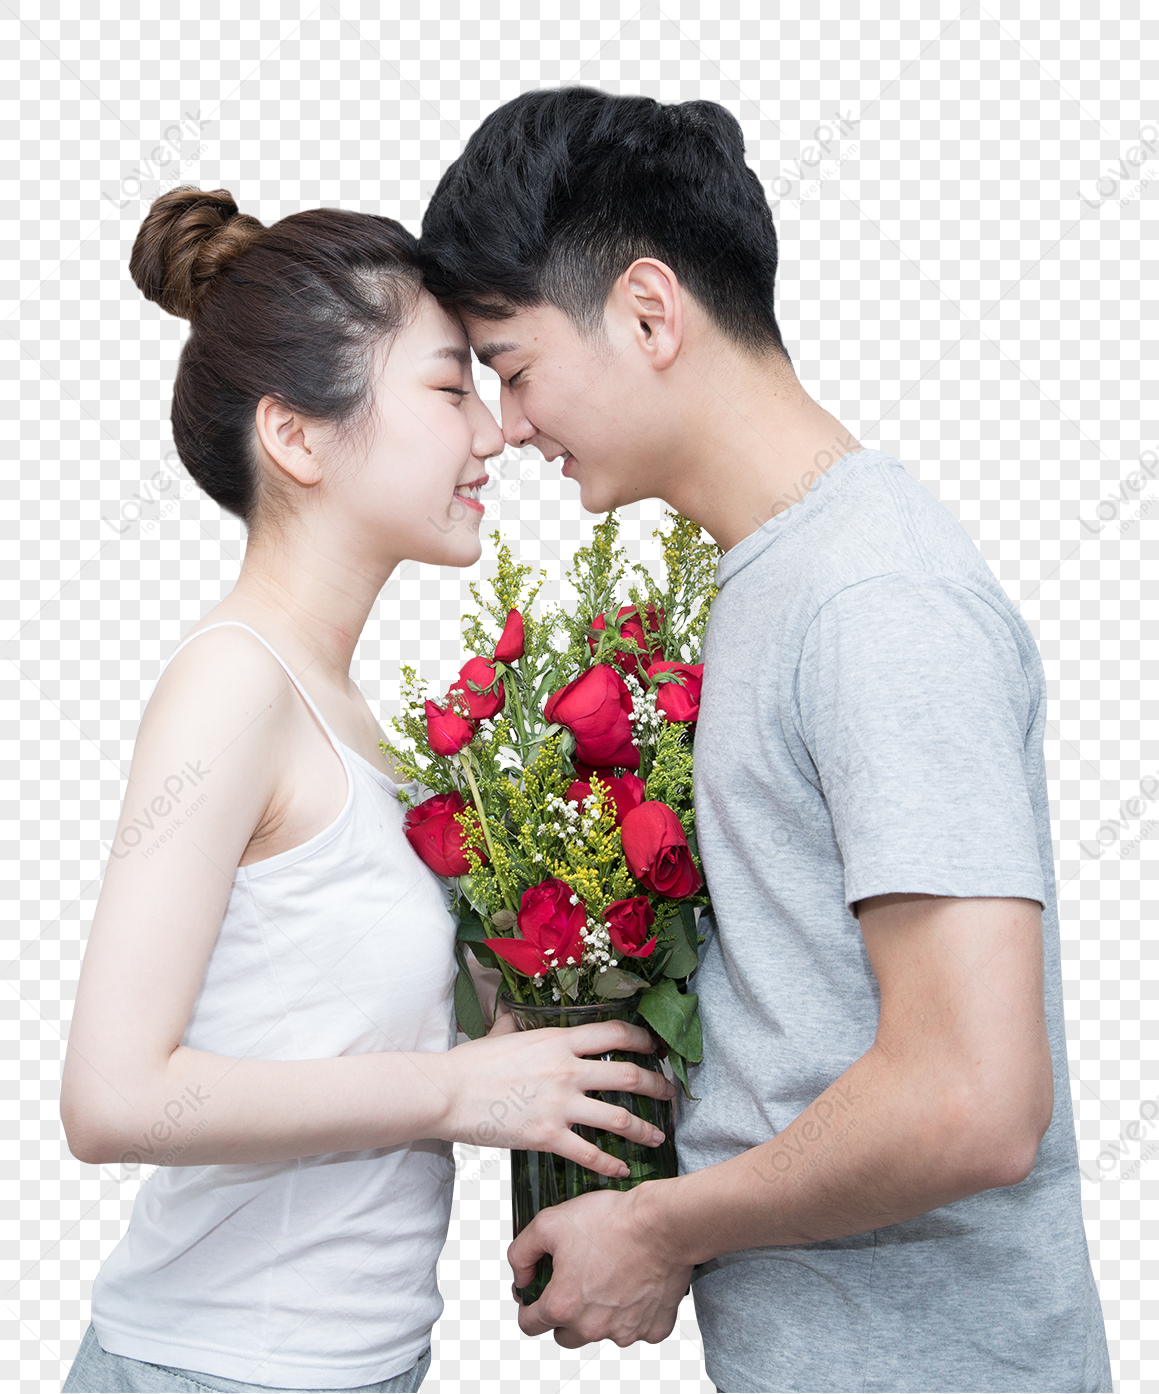 Lovers Holding Roses With Sweet Pictures PNG Image Free Download ...